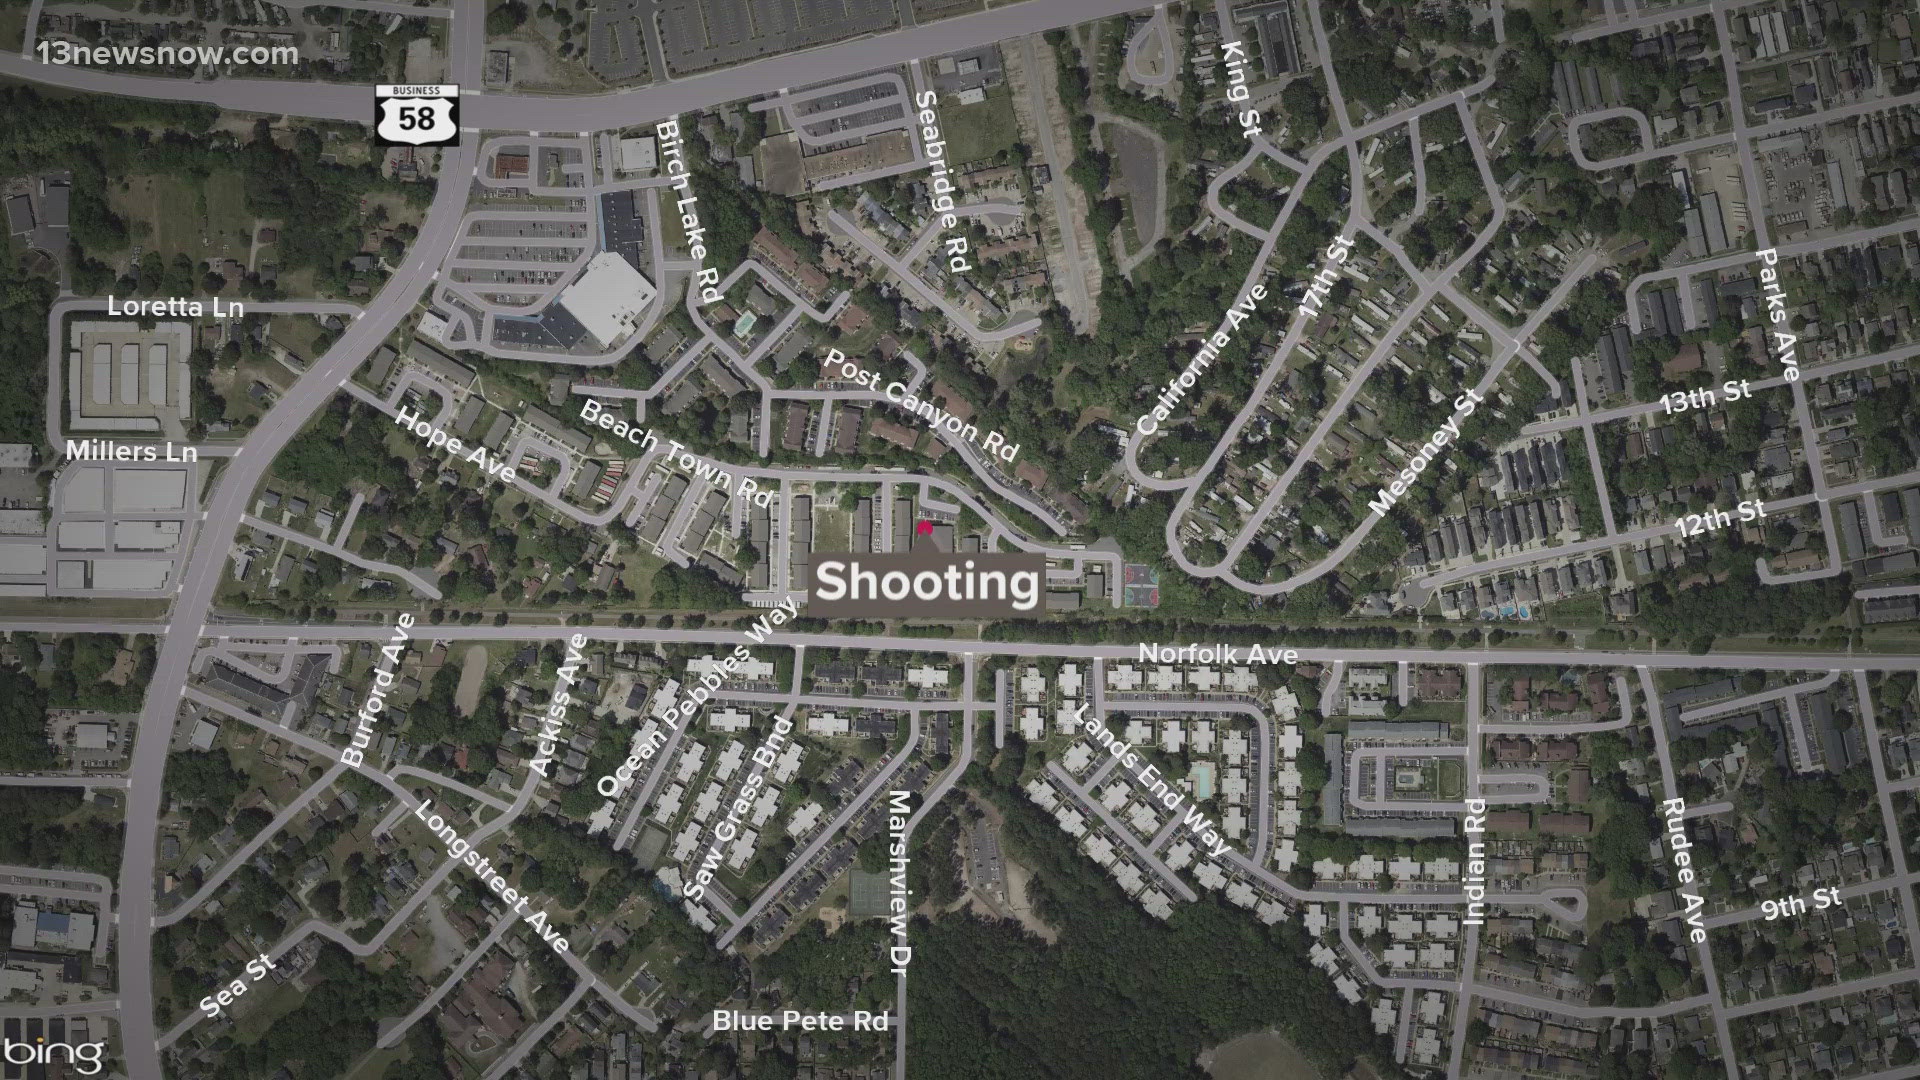 A man is dead and a suspect is in custody after a deadly shooting in Virginia Beach.